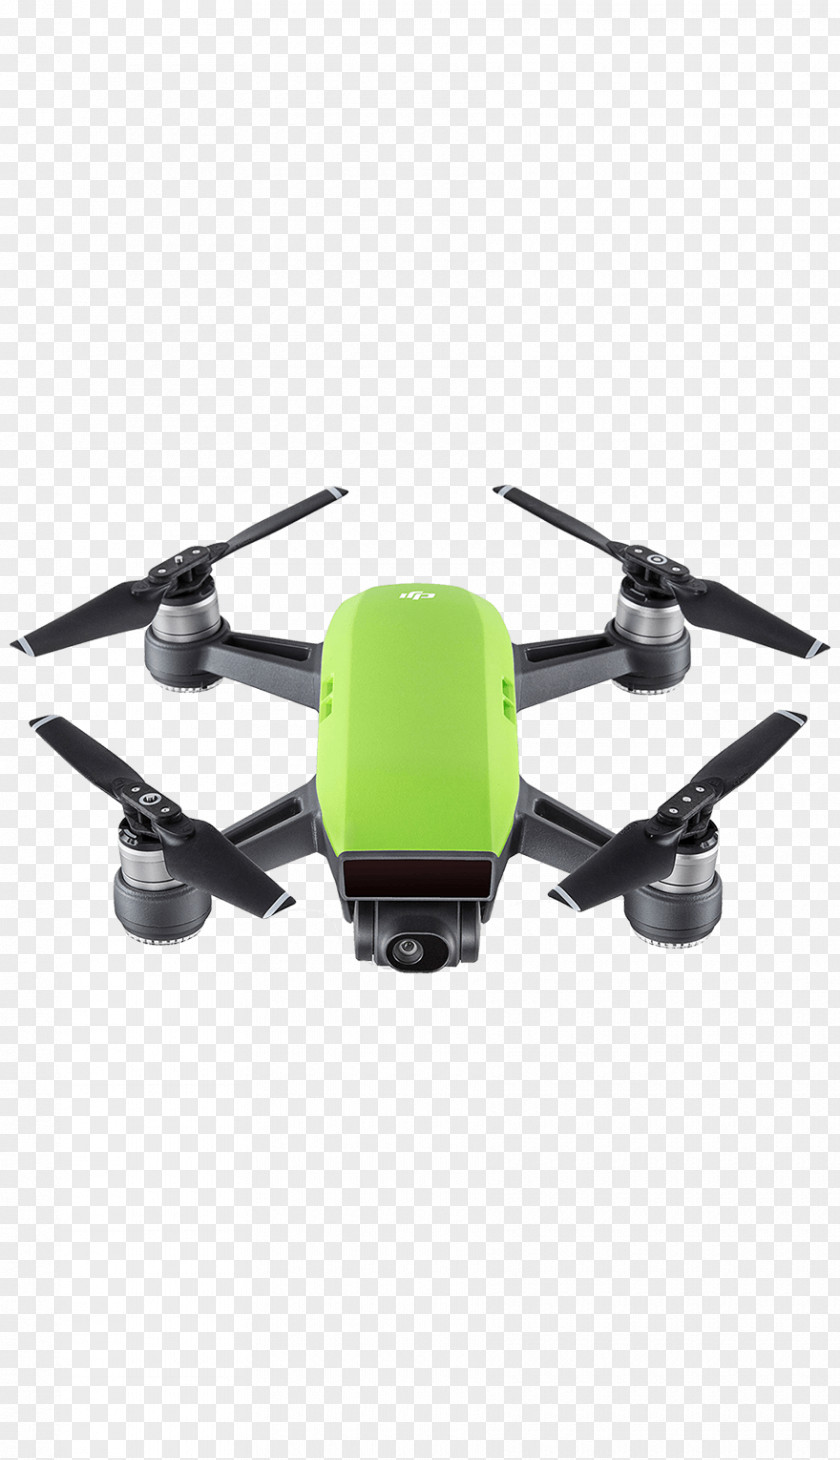 Green & Healthy Logo Mavic Pro Quadcopter DJI Spark Unmanned Aerial Vehicle PNG